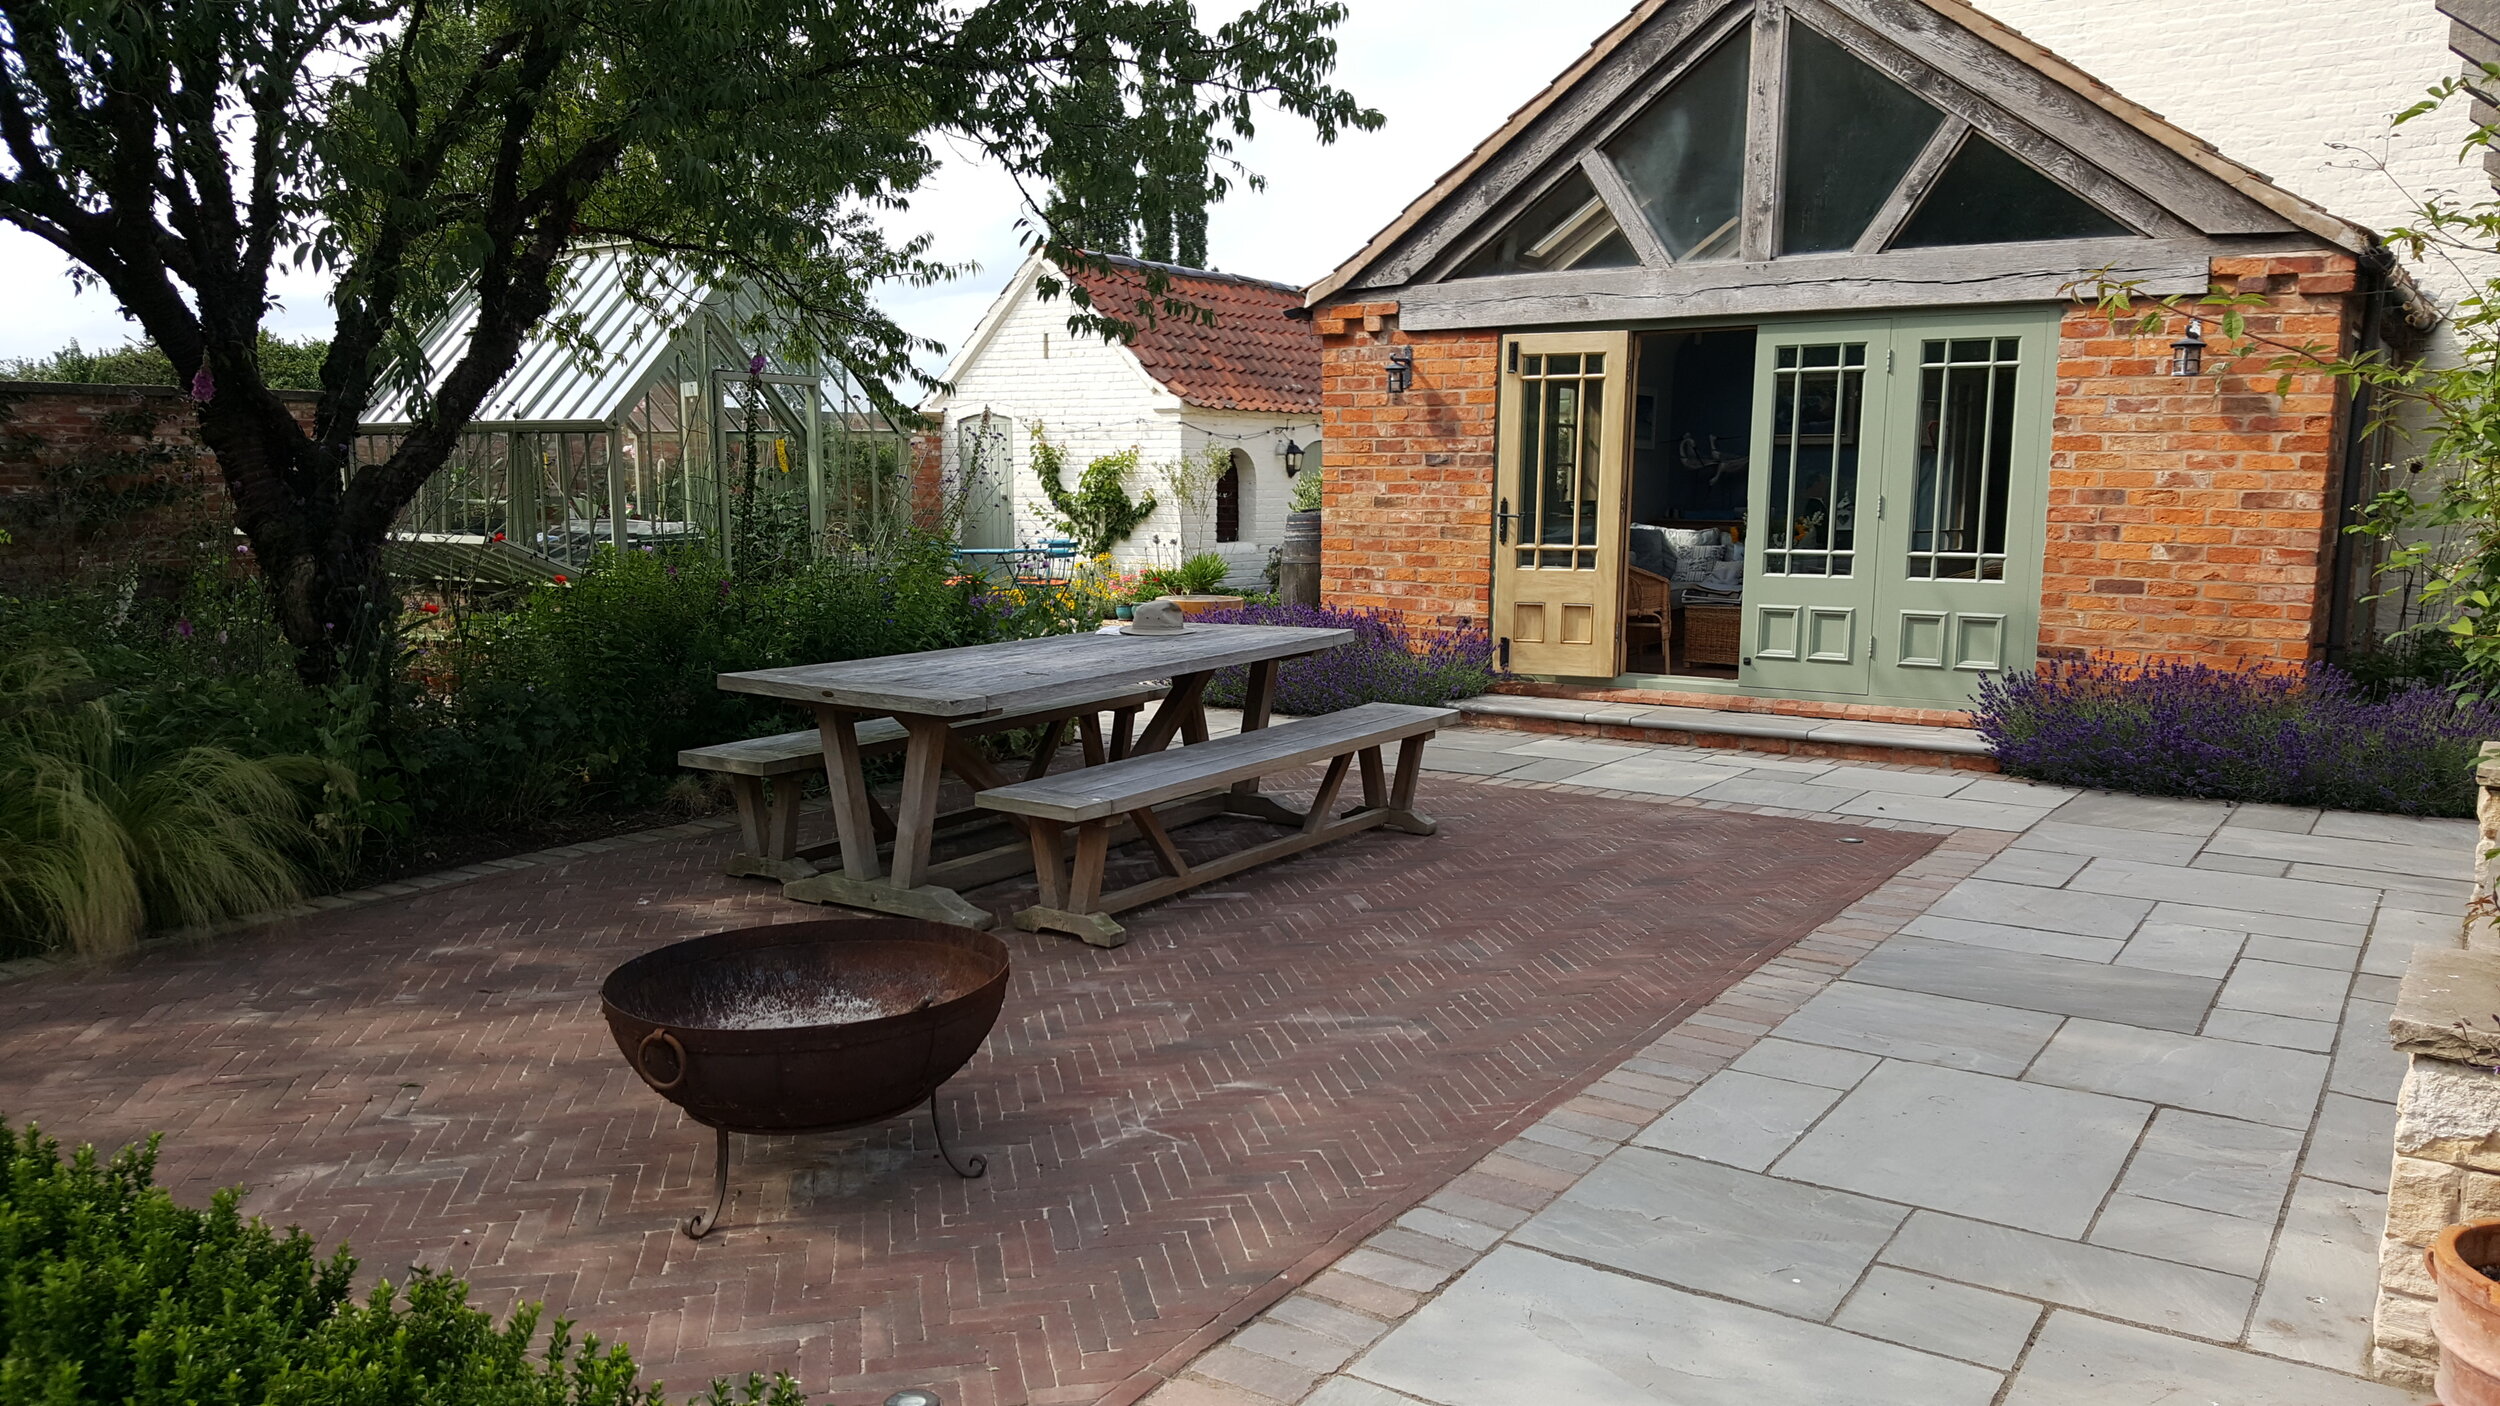 5 Garden design Lincolnshire - Fire pit garden table brick and paved terrace.jpg